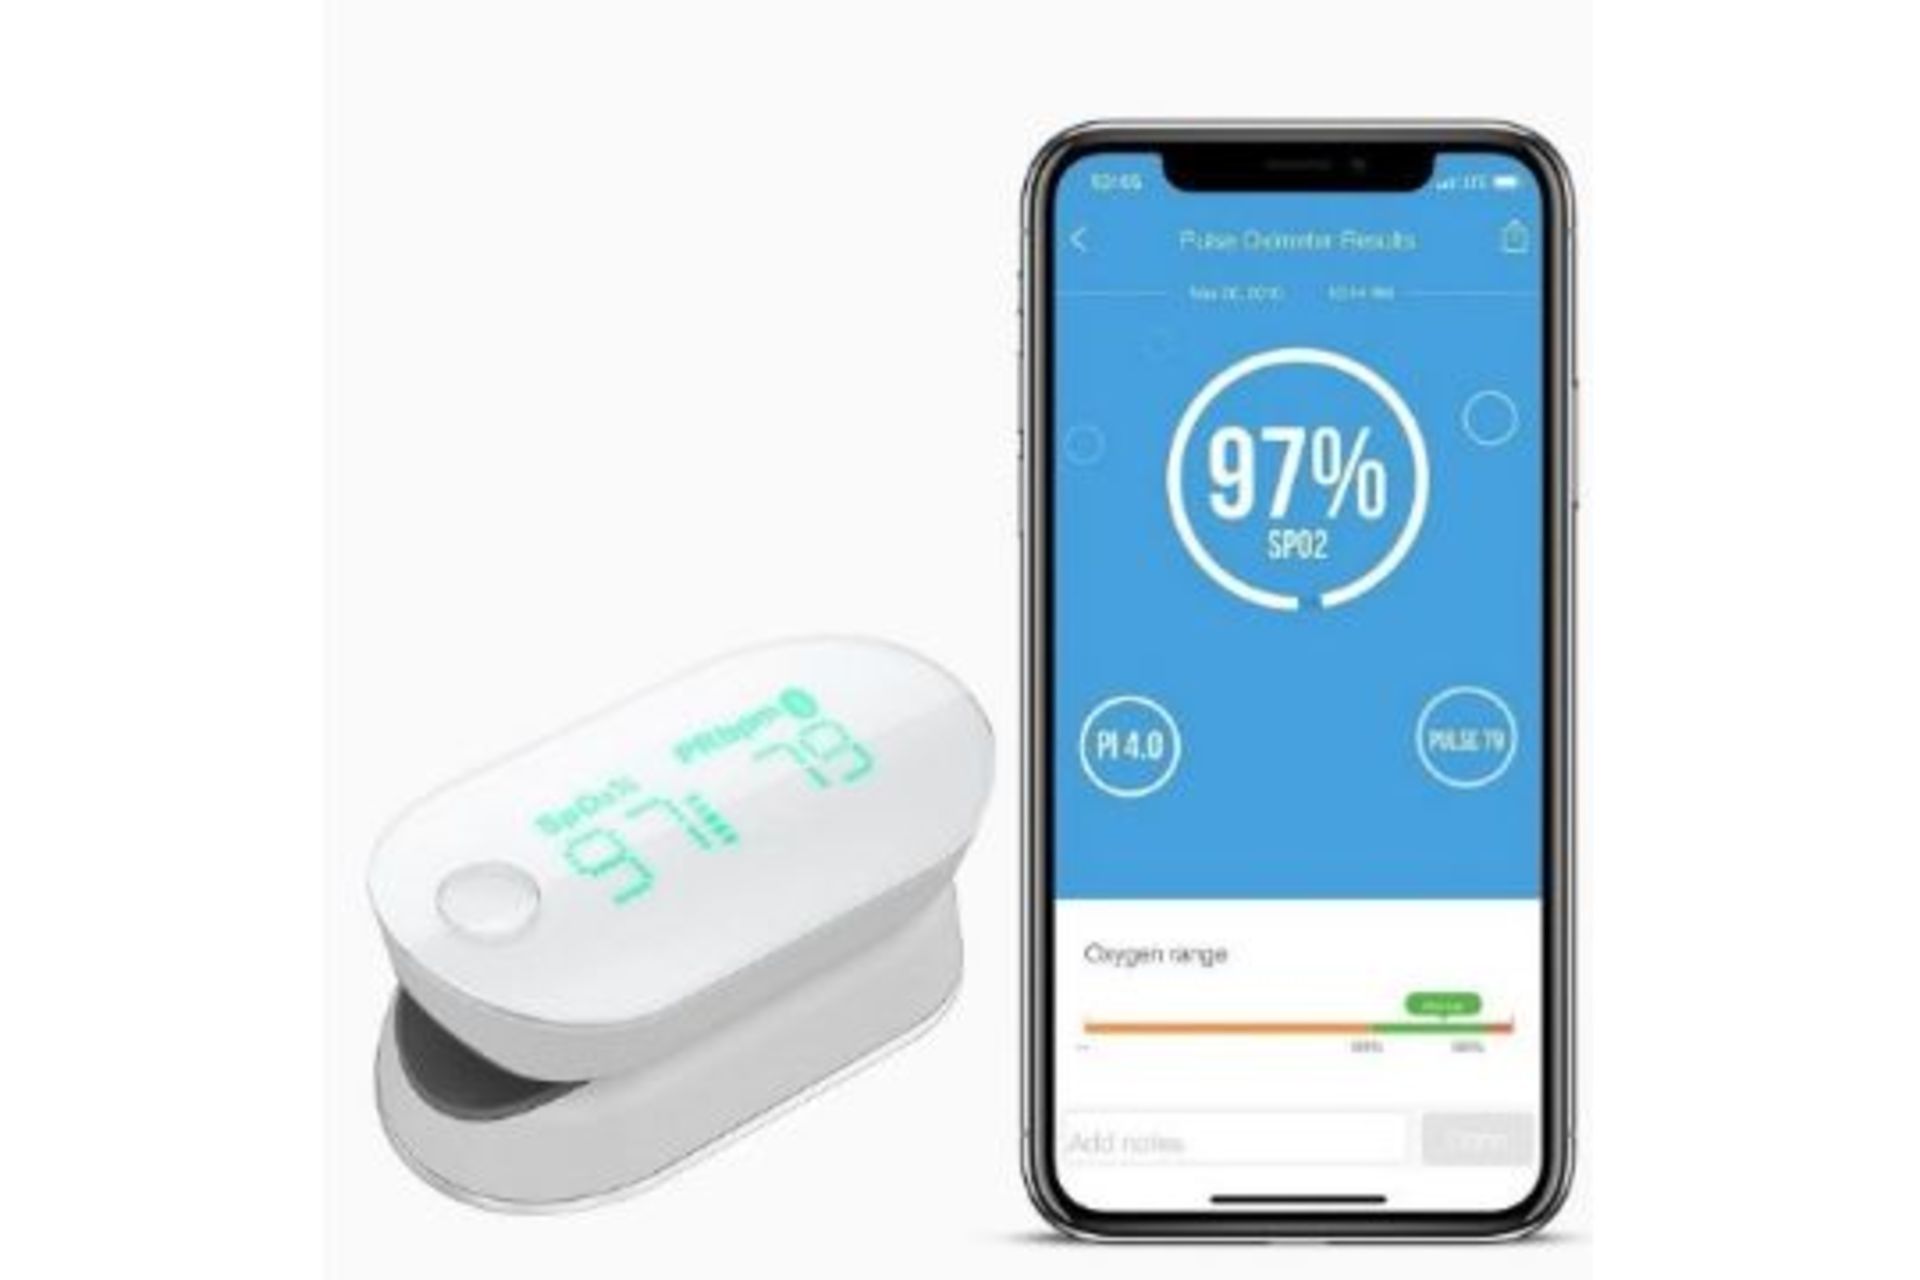 NEW & BOXED iHealth Air Pulse Oximeter. Accurately measure your blood oxygen level, pulse rate, - Image 5 of 6